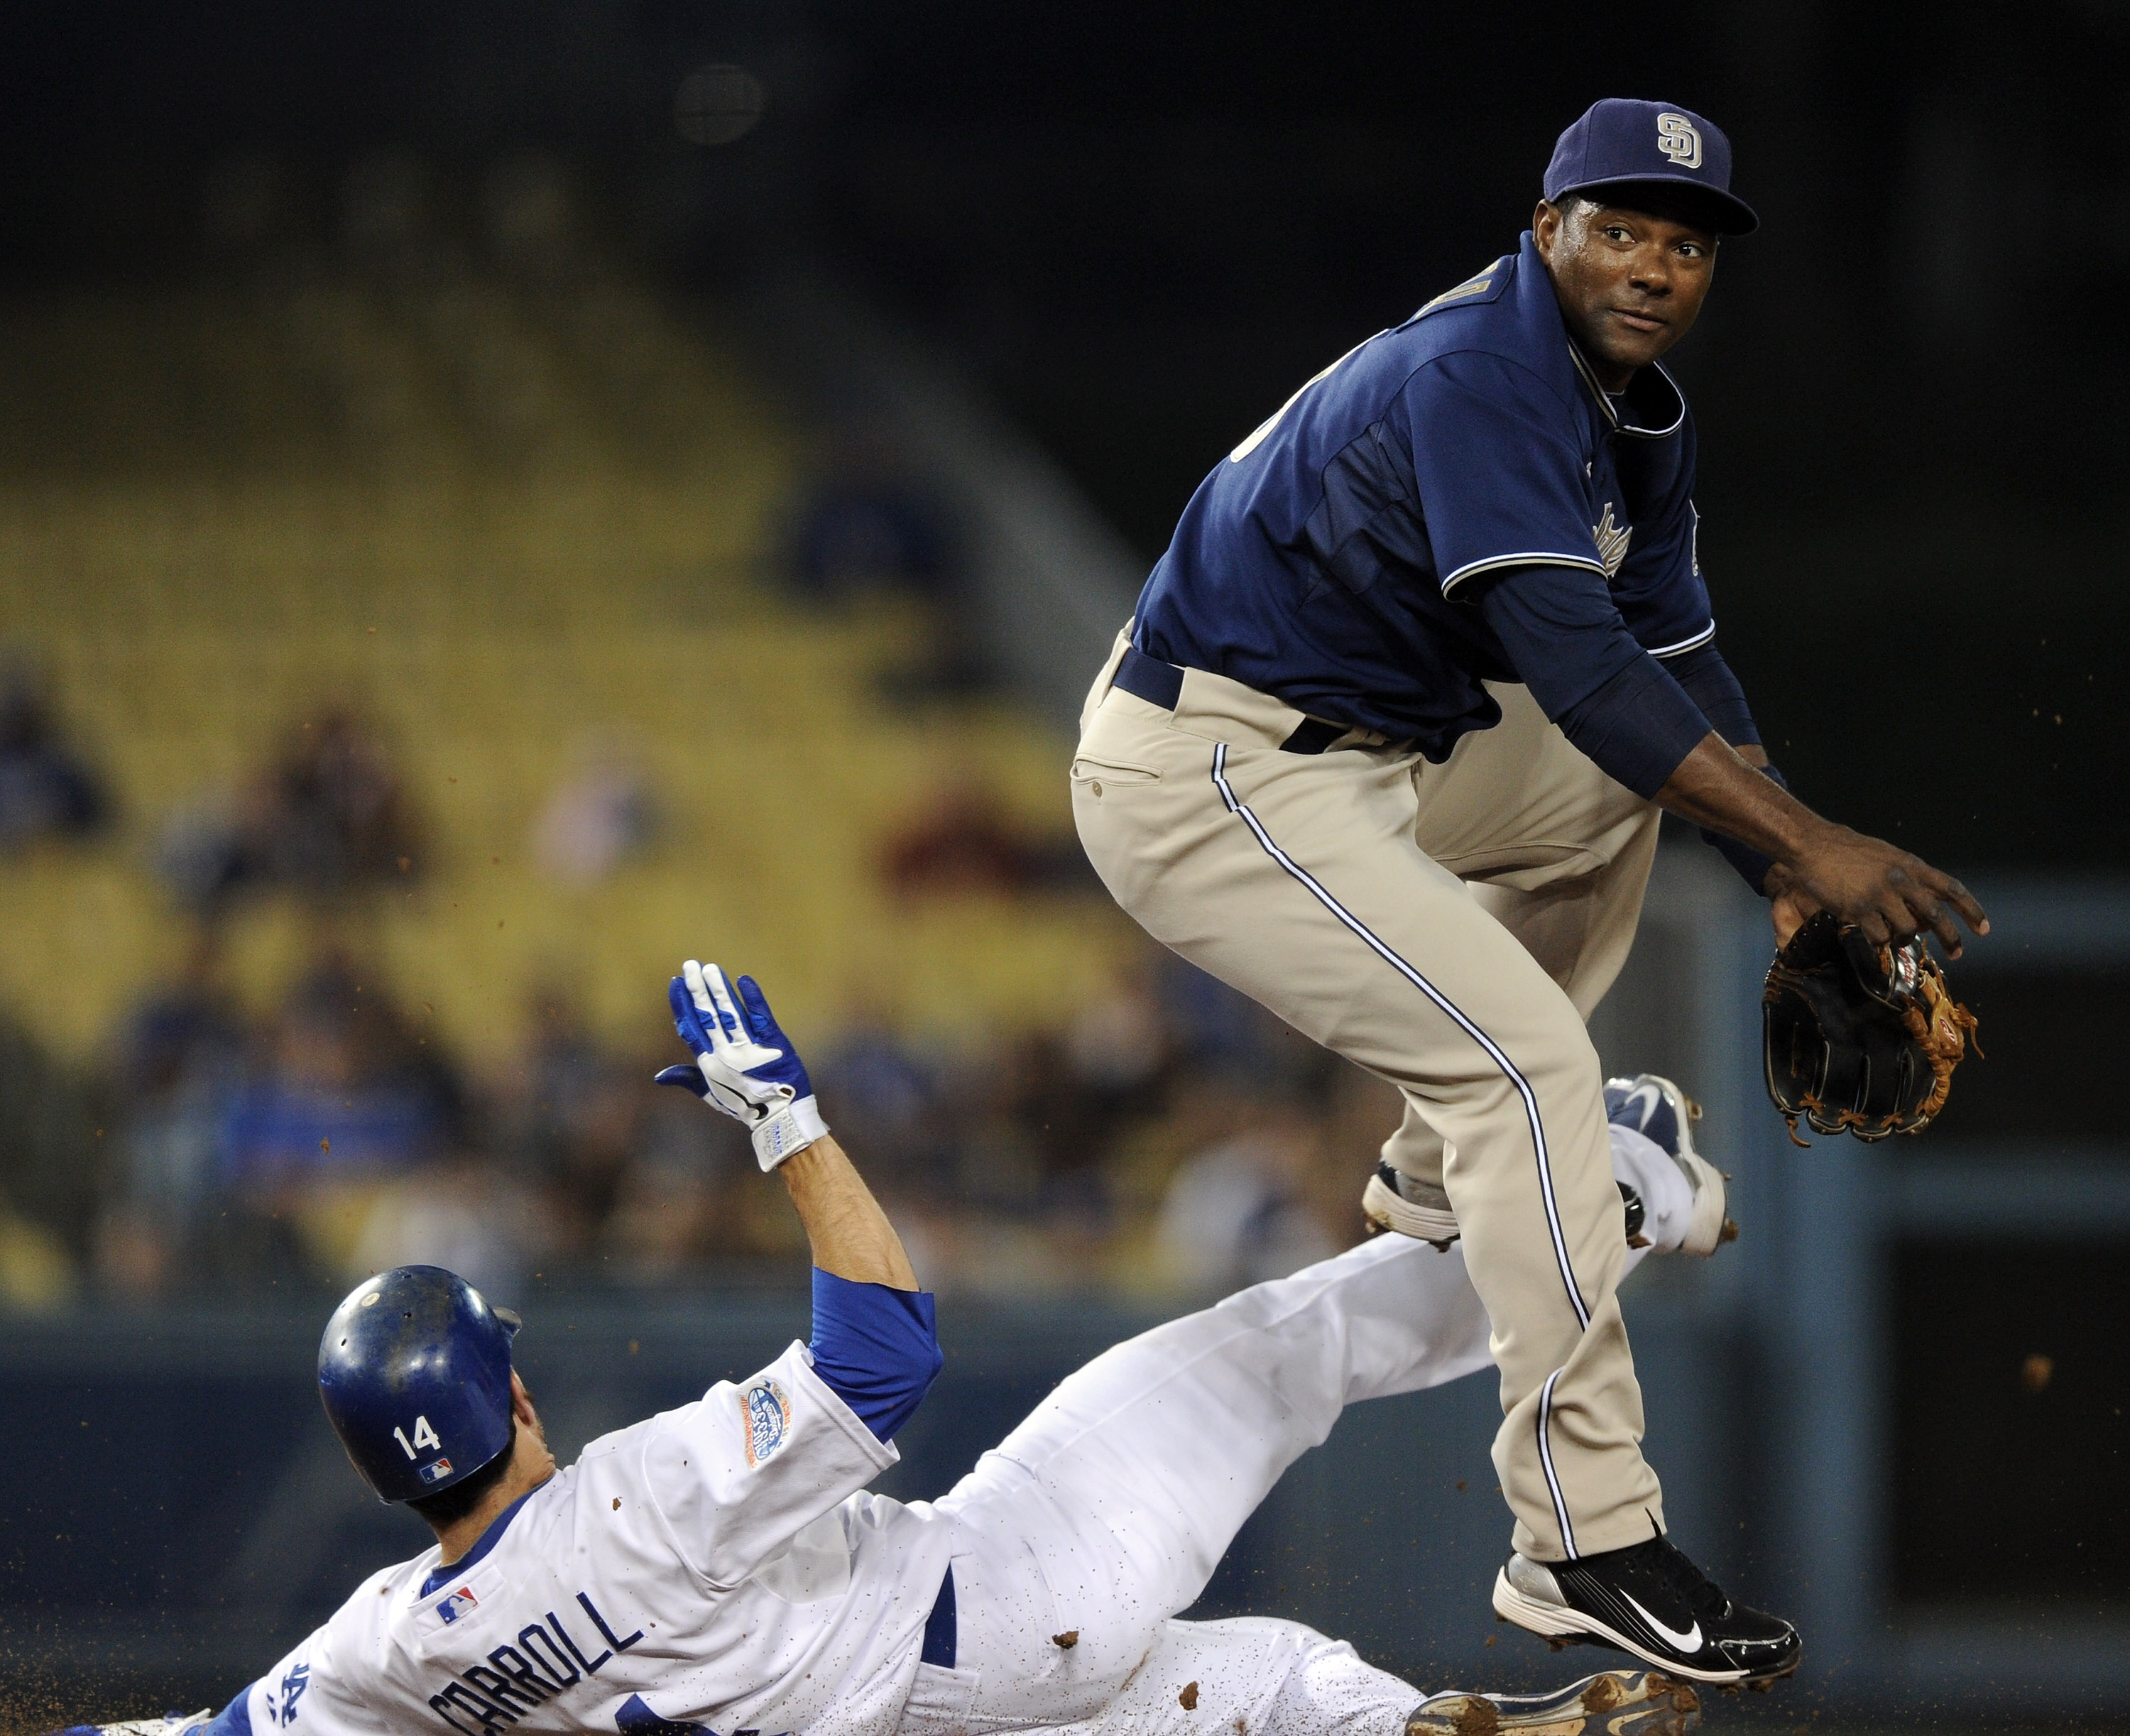 LOS ANGELES, CA - SEPTEMBER 21:  Miguel Tejada #10 of the San Diego Padres jumps away from the slide of Jamey Carroll #14 of the Los Angeles Dodgers to complete a double play during the first inning at Dodger Stadium on September 21, 2010 in Los Angeles,